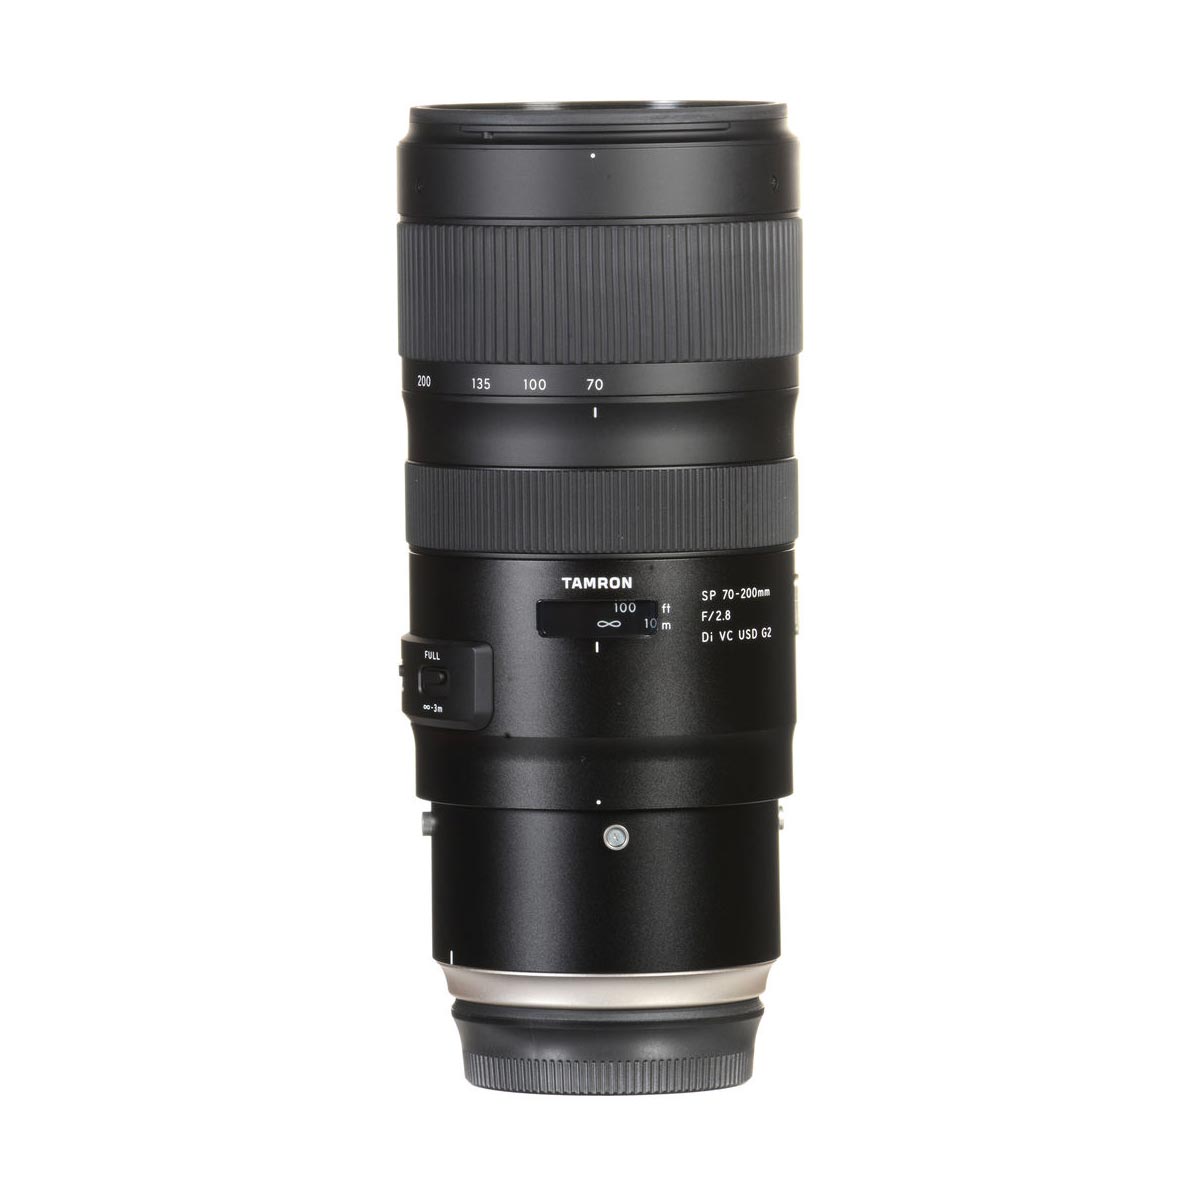 Tamron SP 70-200mm f2.8 DI VC USD G2 Lens for Canon EF